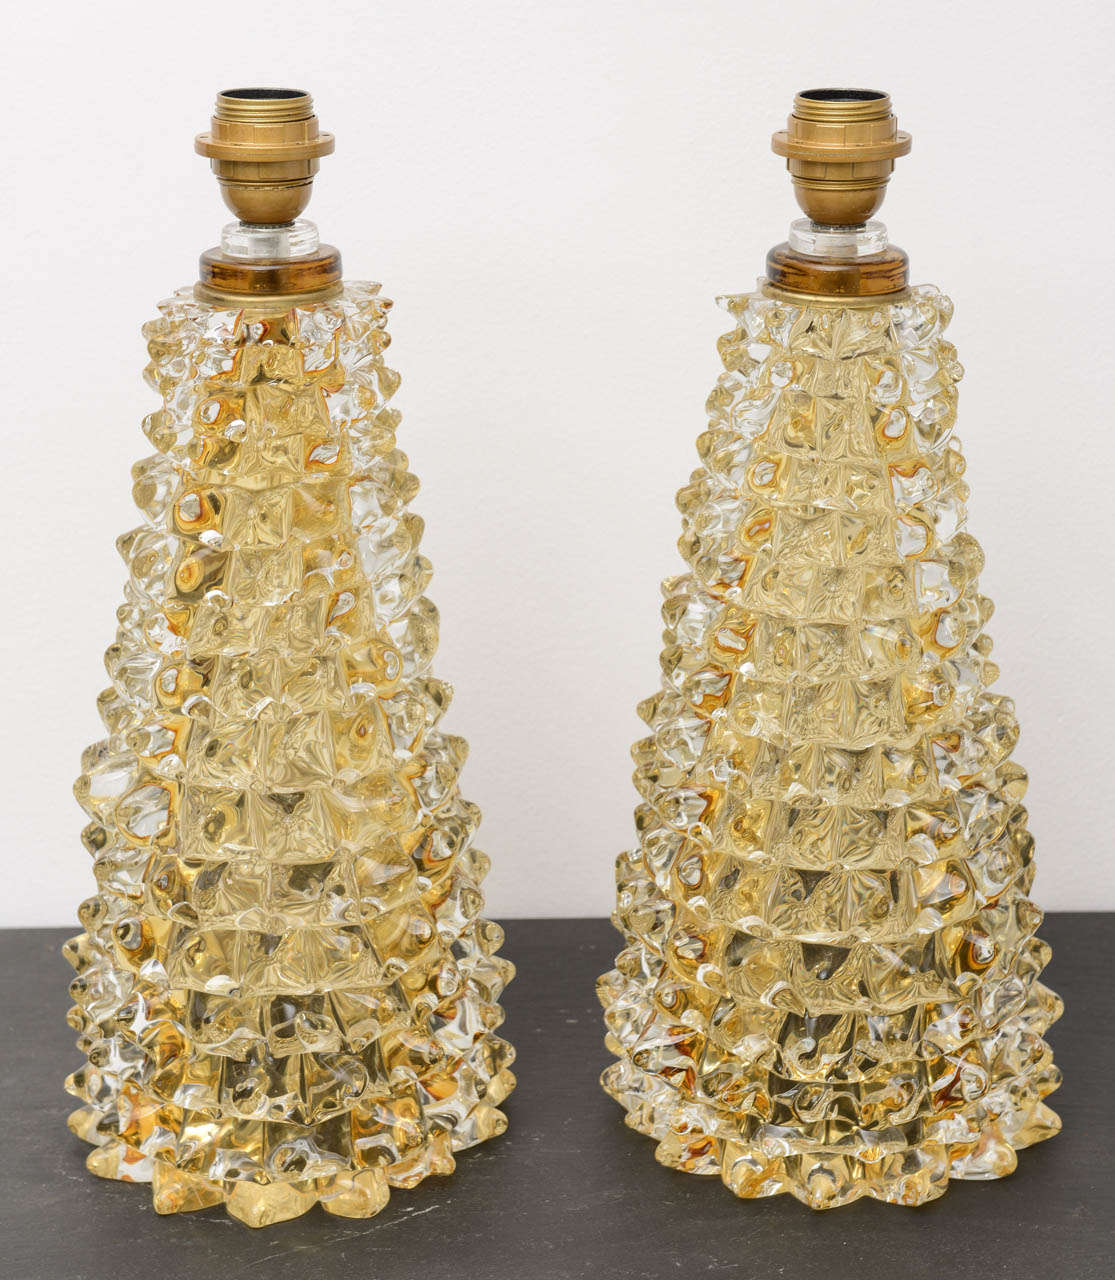 A pair of  rostrato amber Murano glass table lamps,  Italy circa 1970's.

THIS ITEM IS LOCATED IN MANHATTAN AT 1STDIBS@NYDC SHOWROOM. 
200 LEXINGTON AVE - 10TH FLOOR, NYC